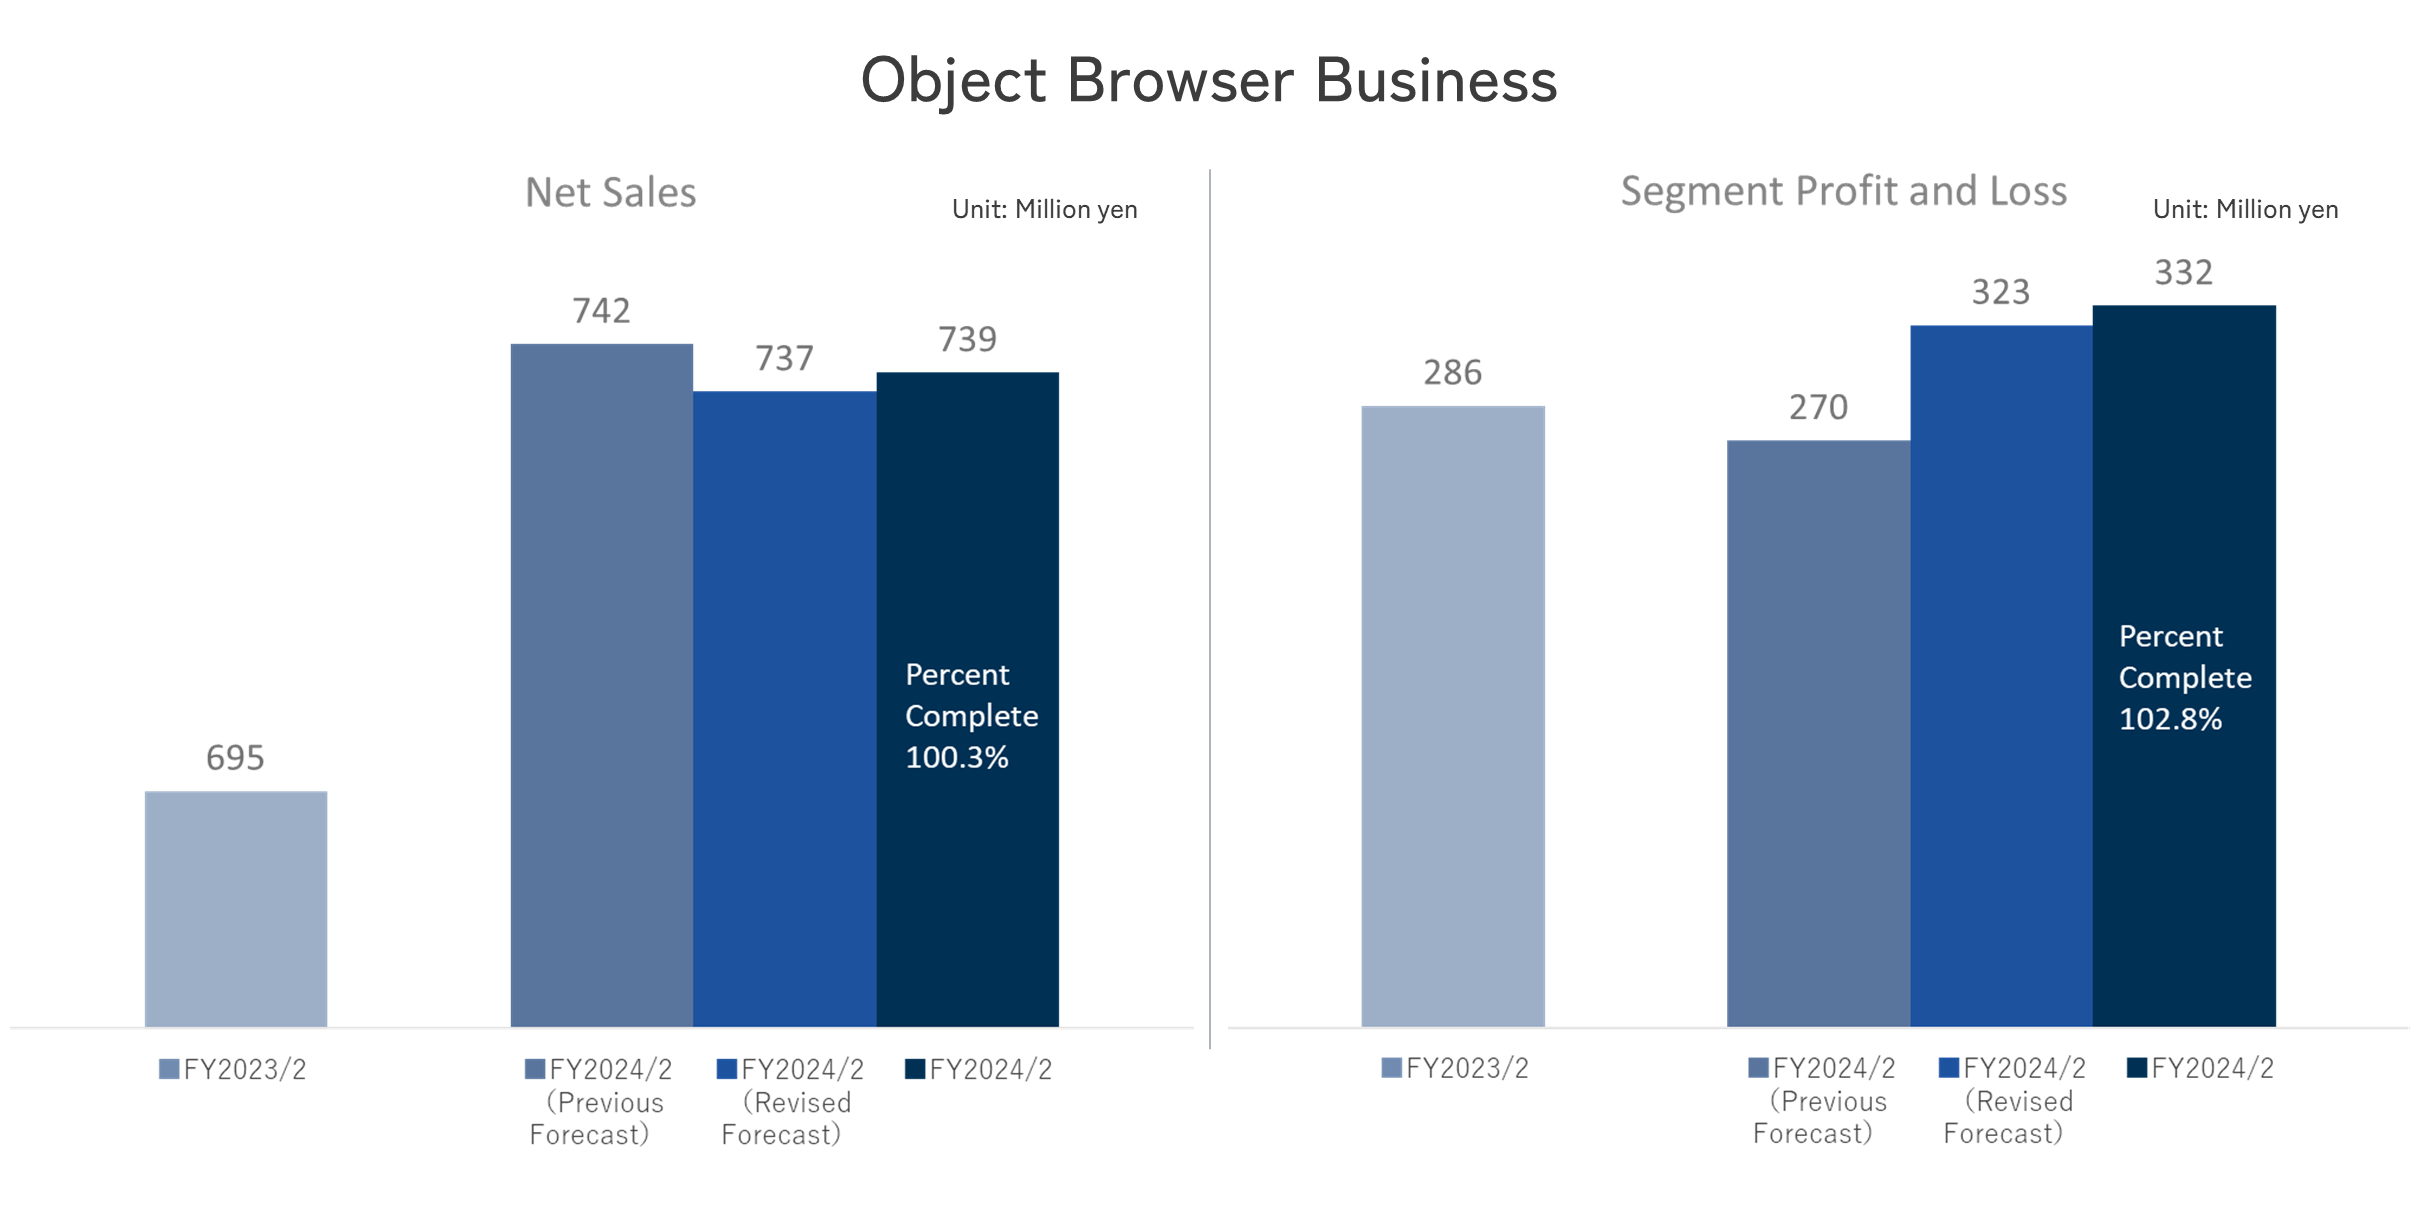 Object Browser Business